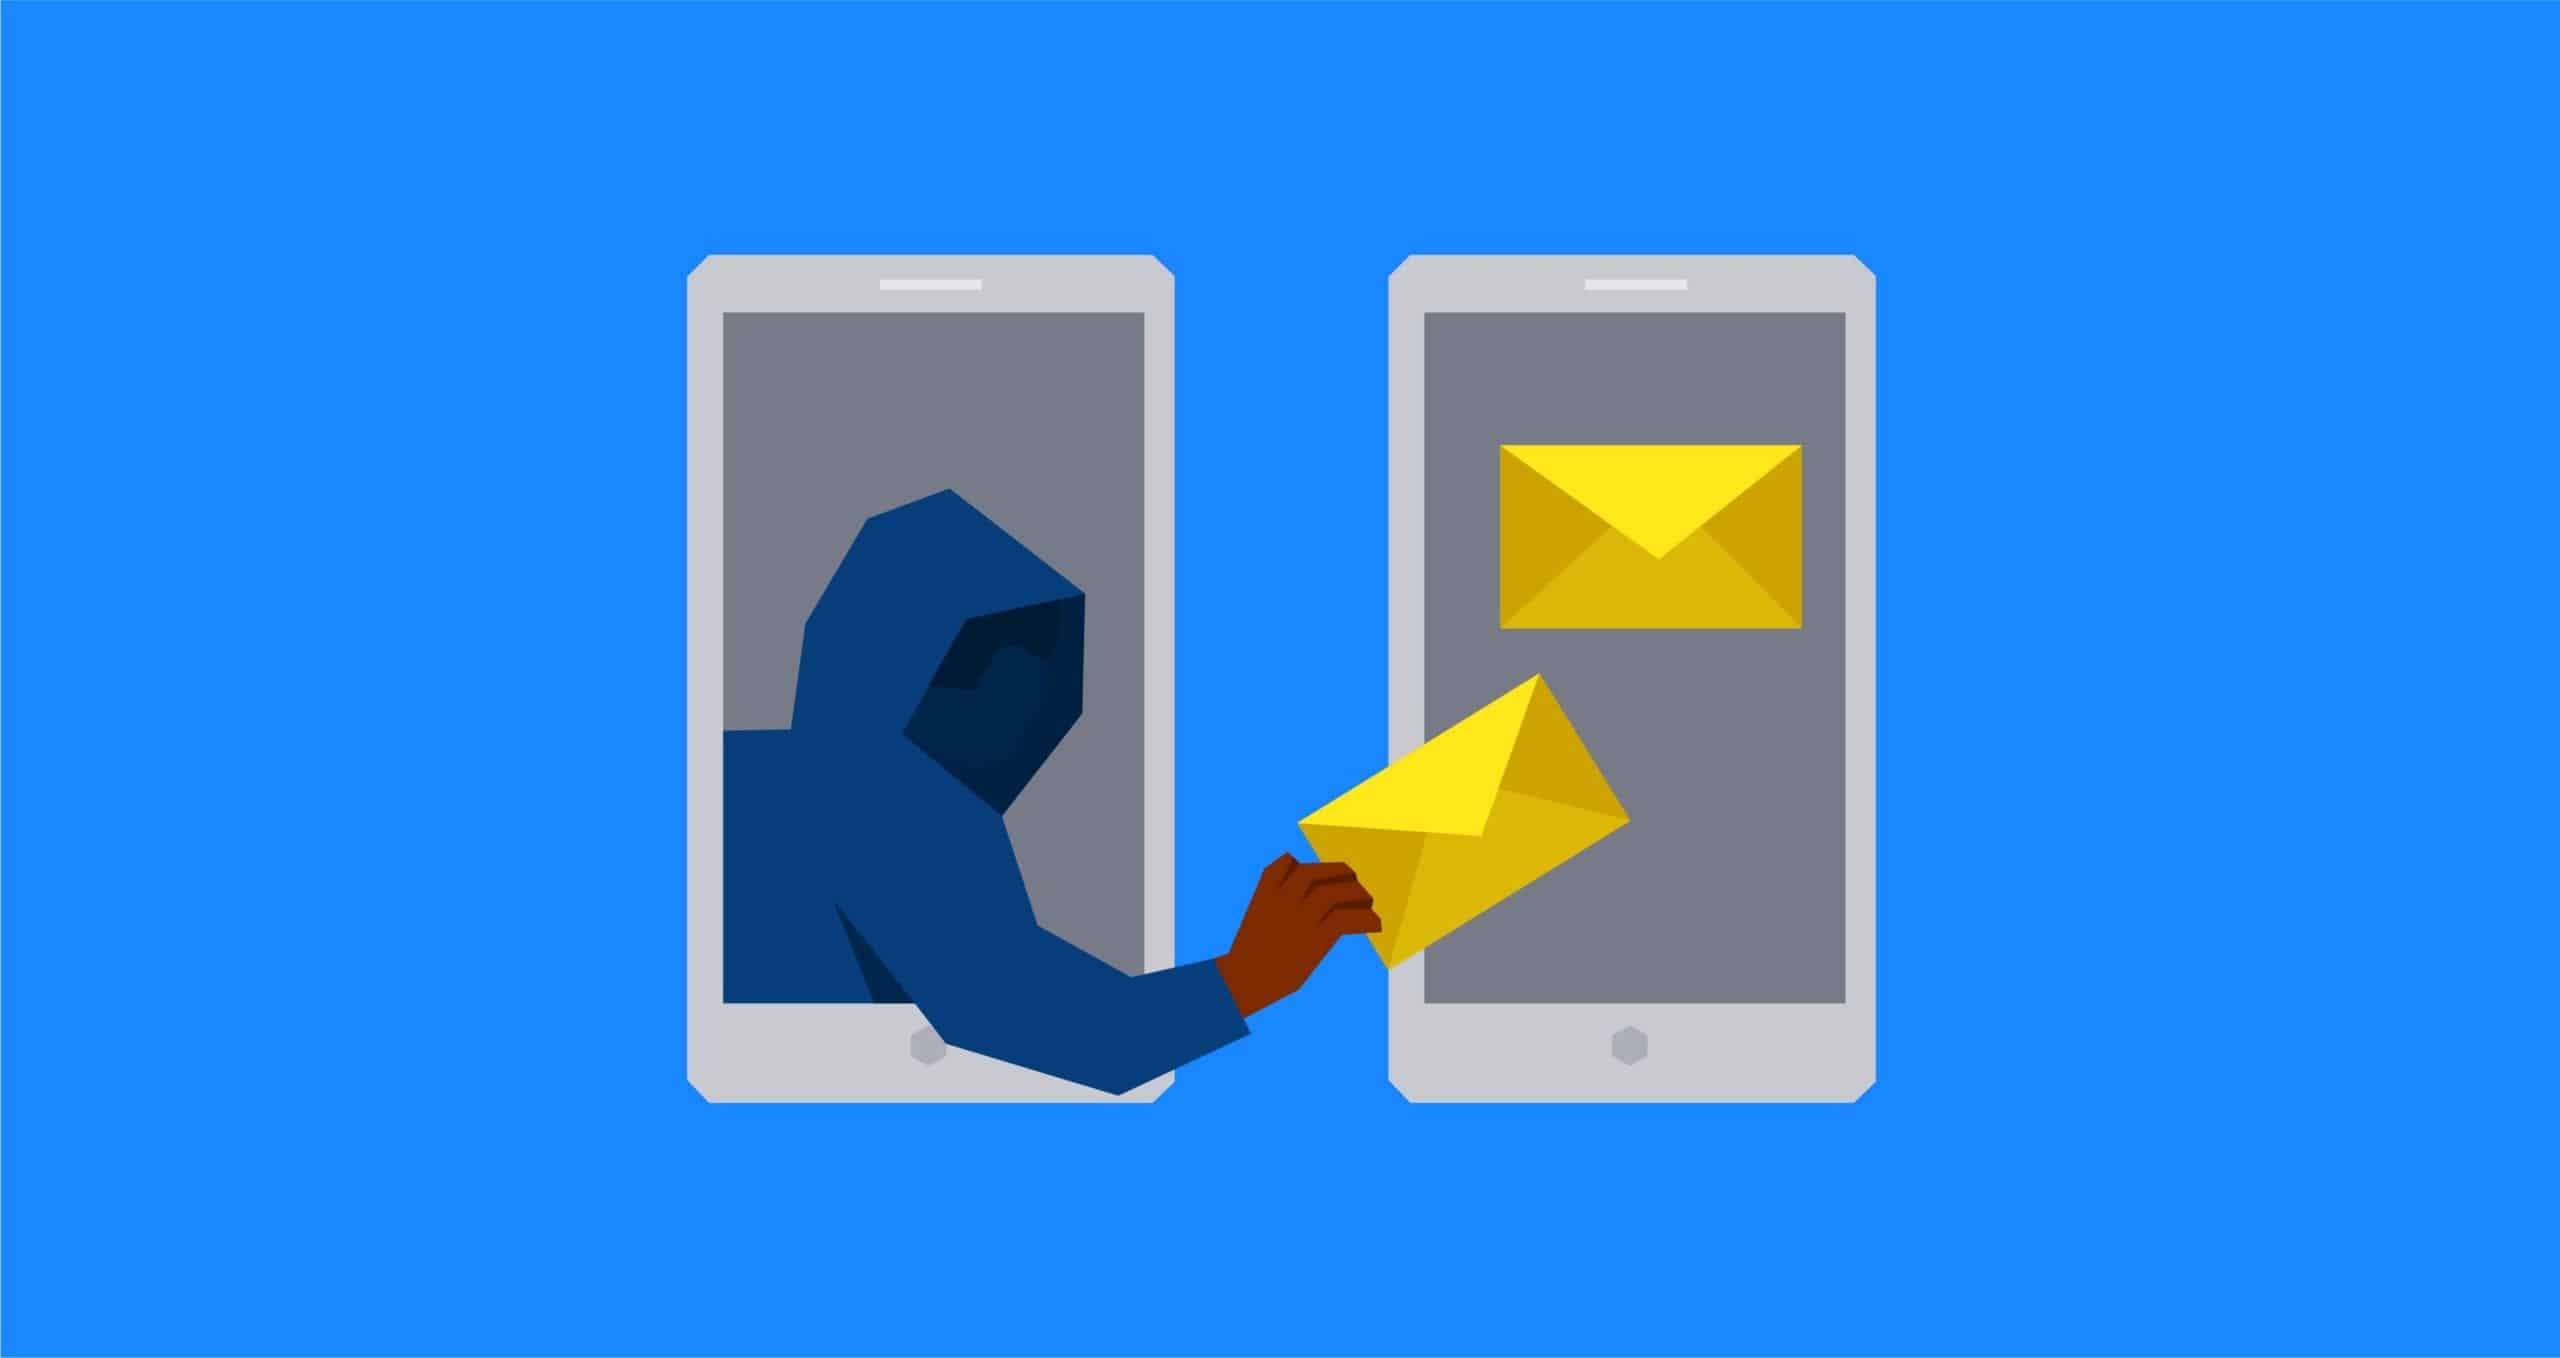 Cybercriminals are circumventing email security with image-based